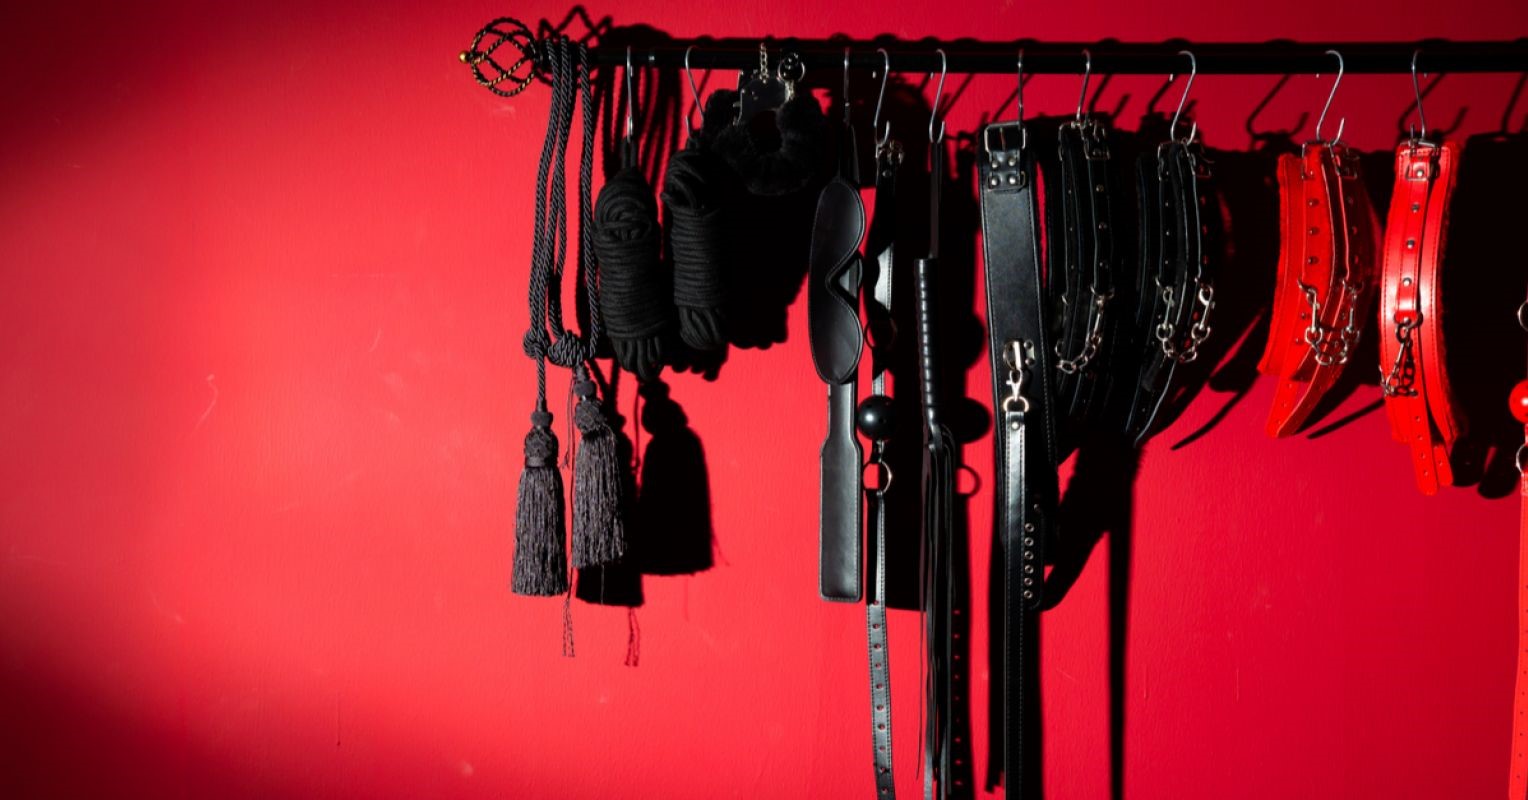 A collection of BDSM toys on a rack against a red wall.